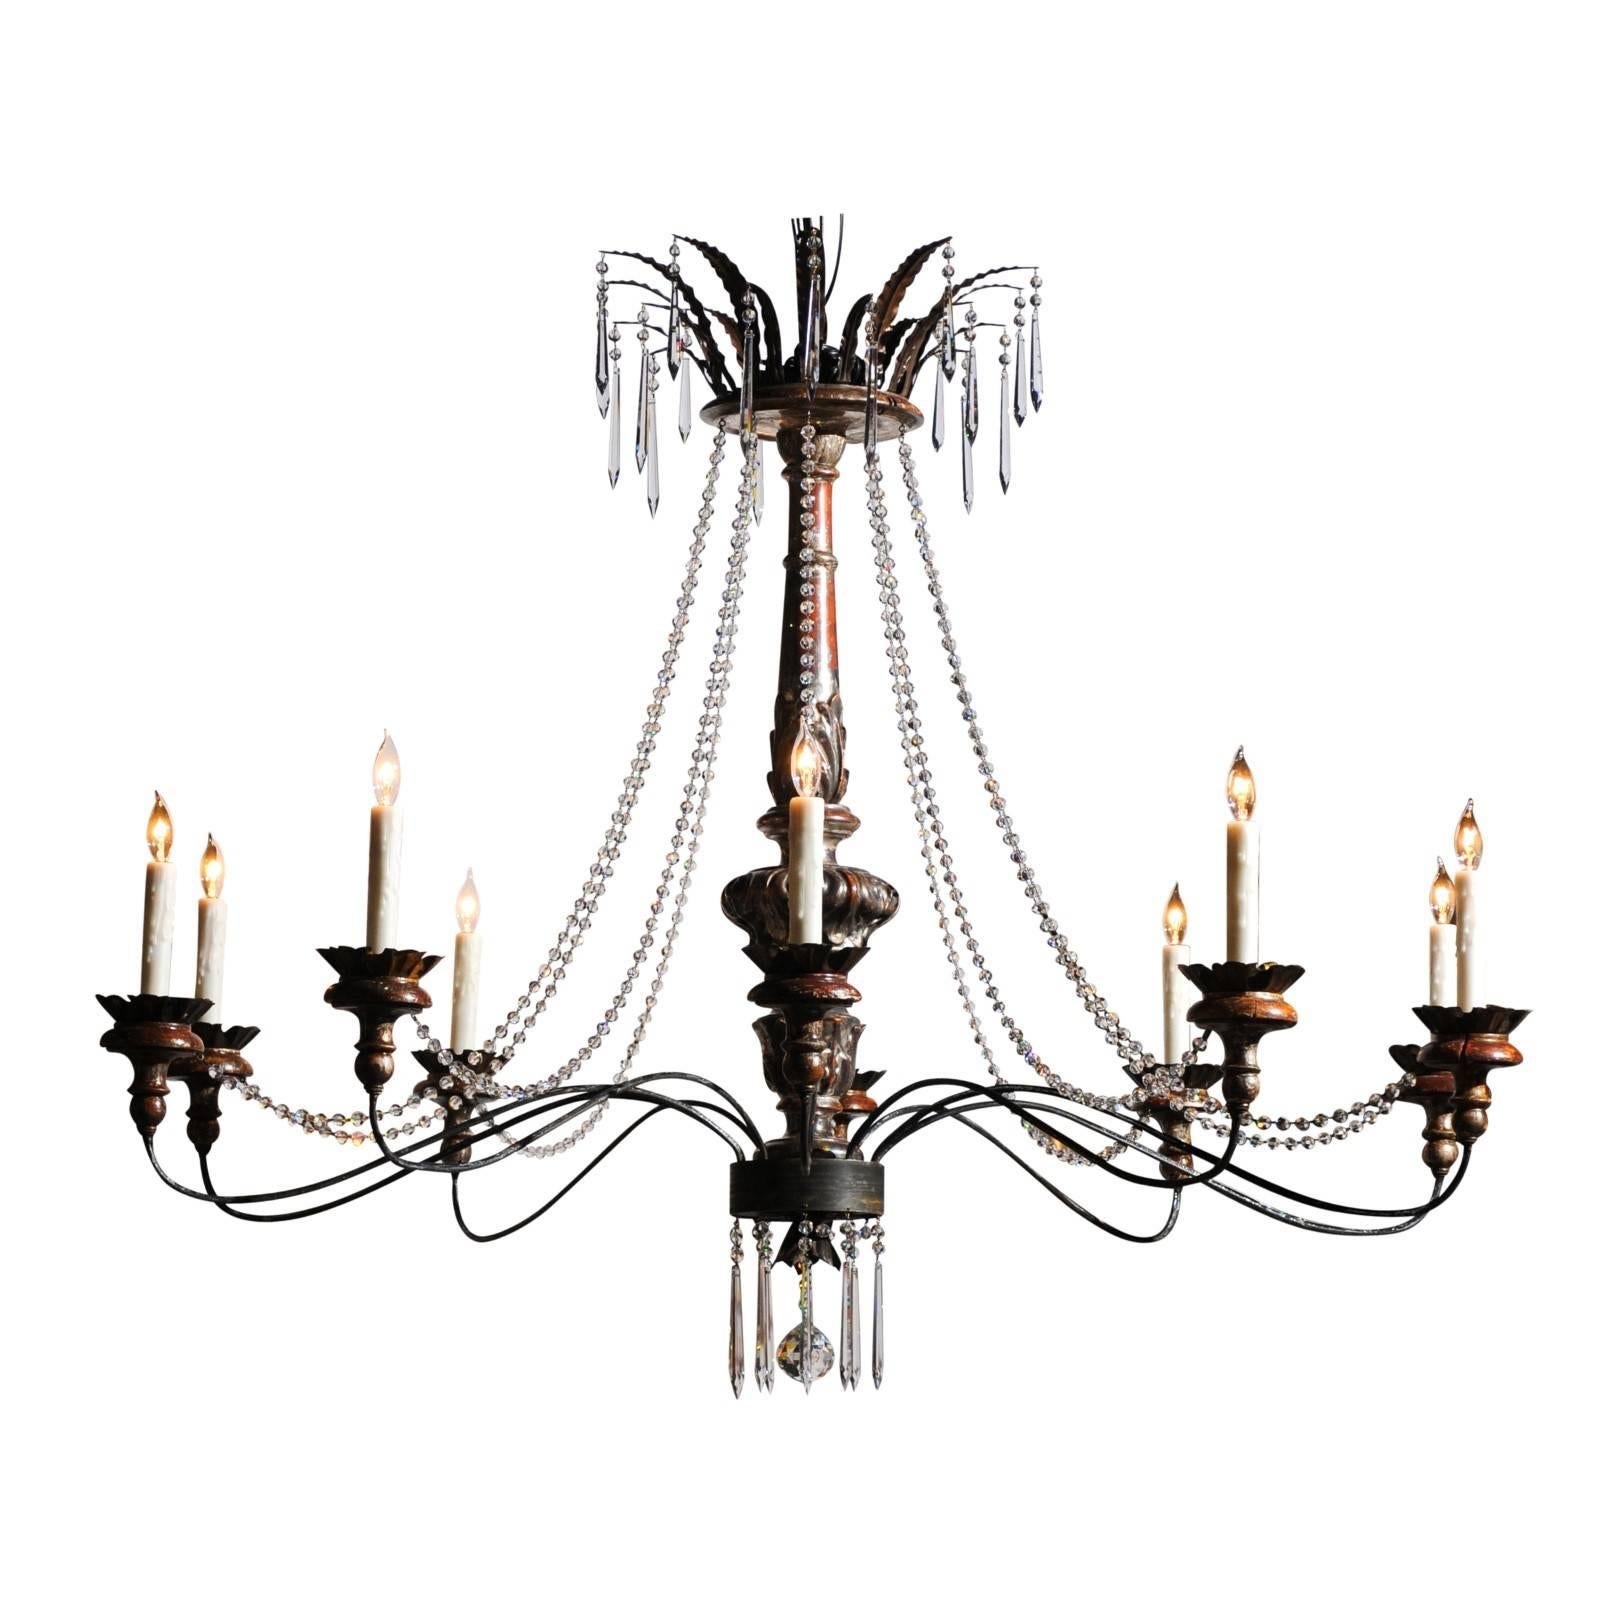 Large Ten-Light Wood and Crystal Chandelier Made of 19th Century Italian Pricket